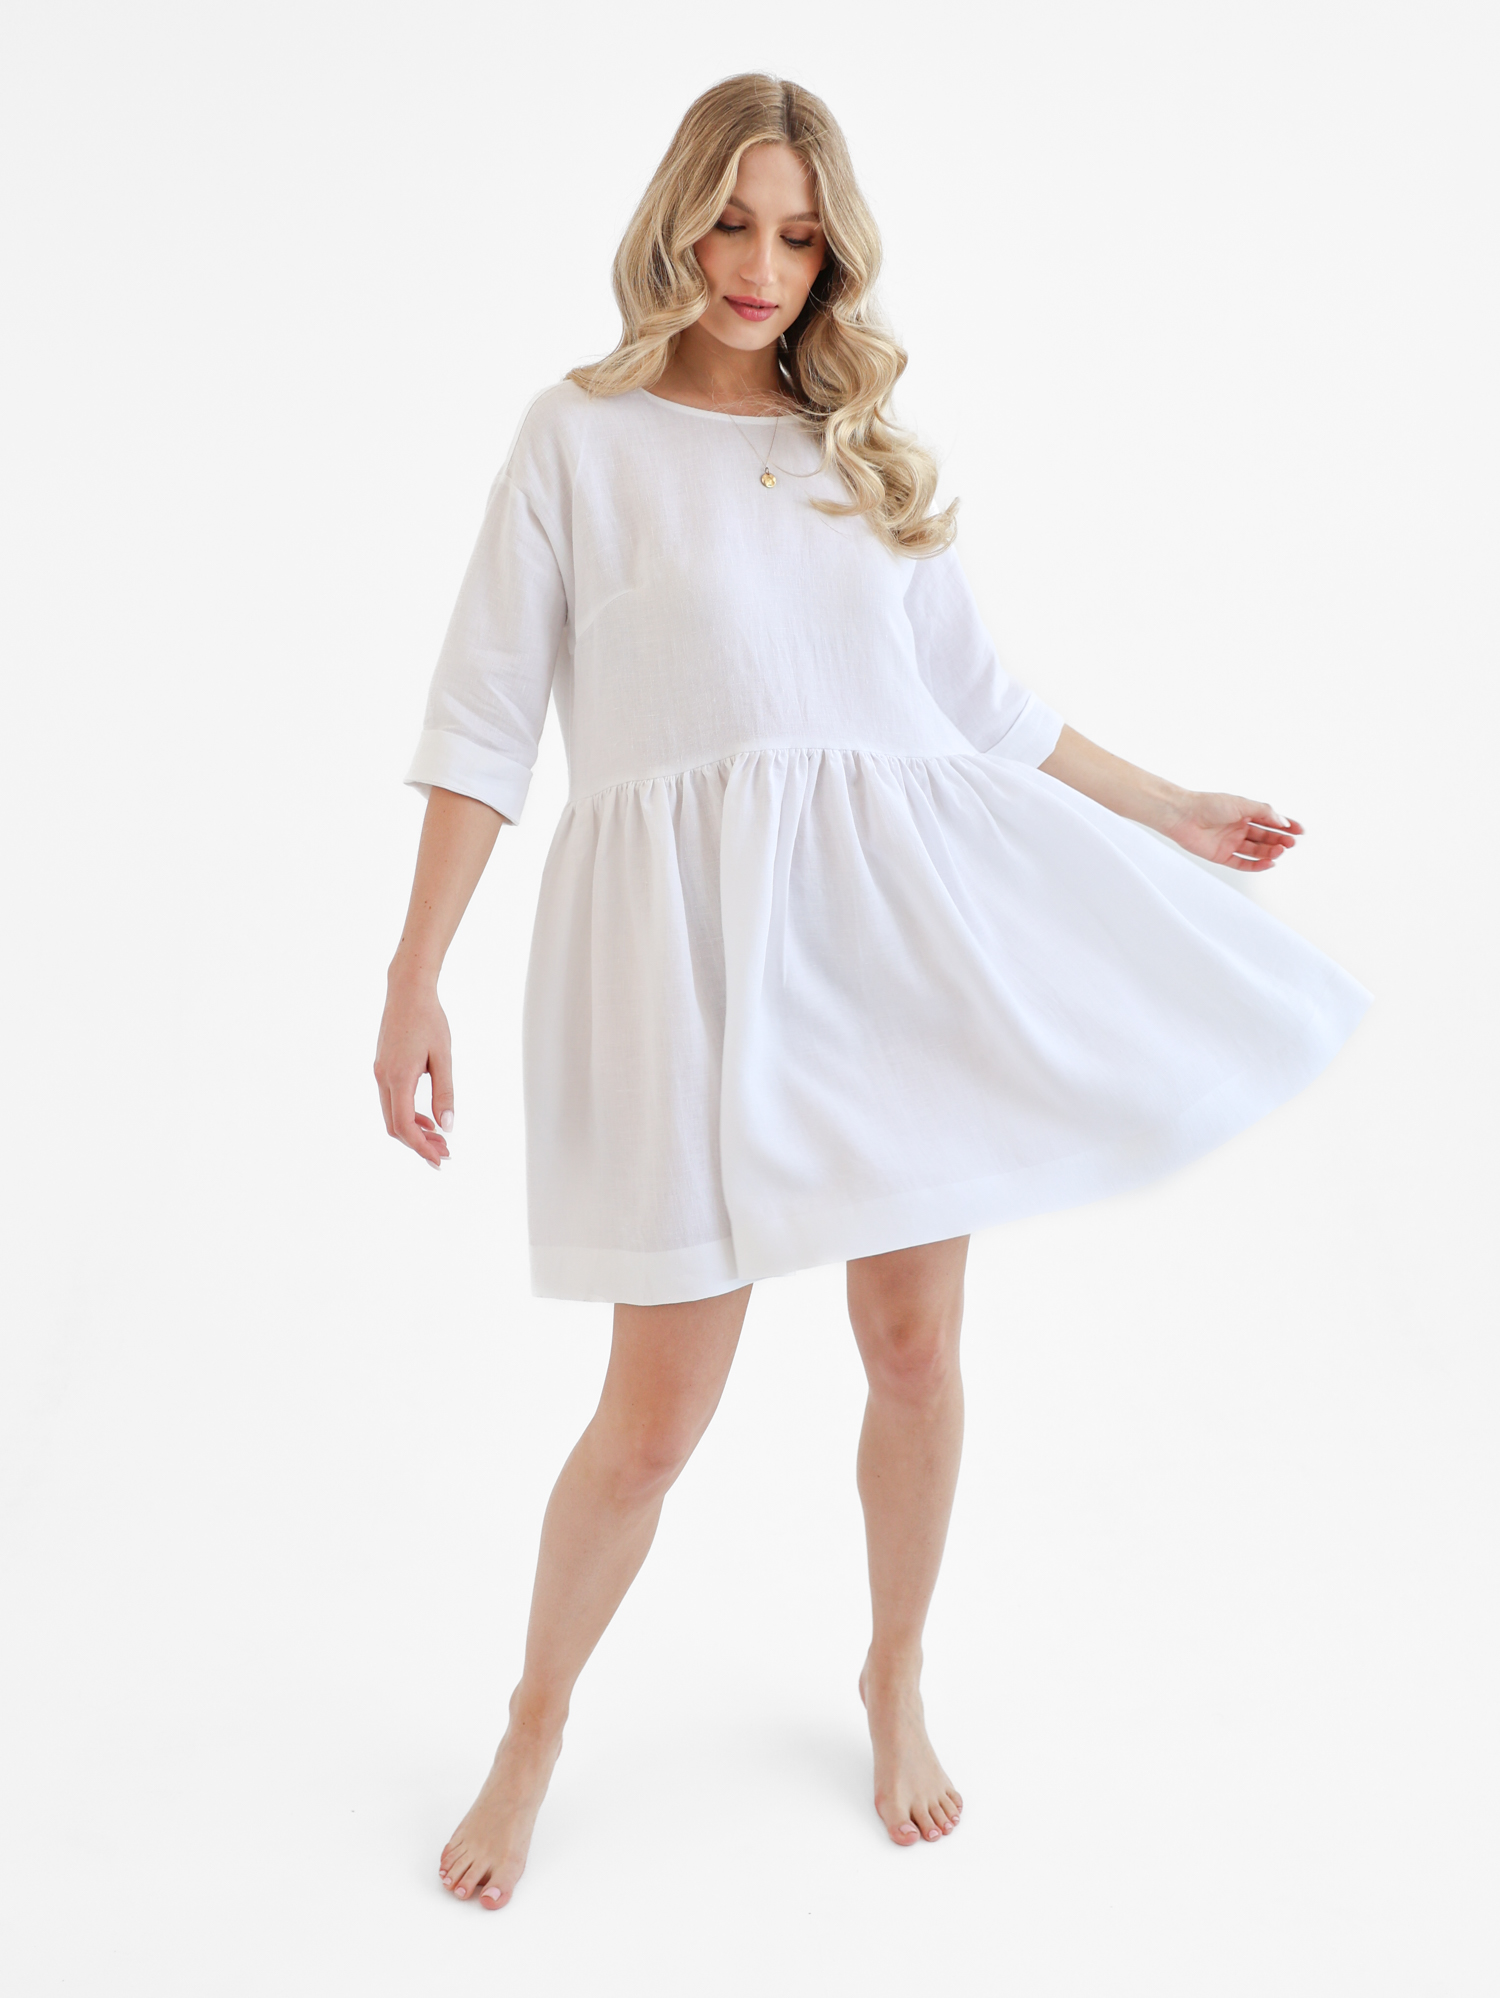 Linen dress for hot weather